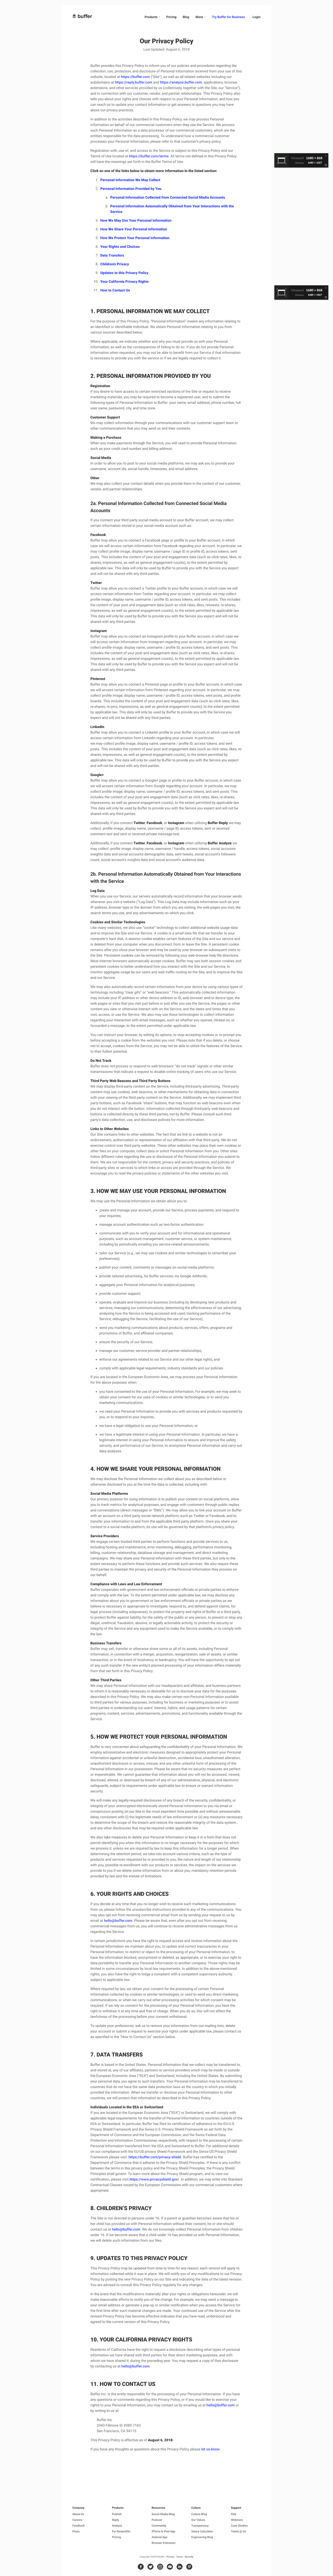 Screenshot of the Privacy Policy page from the Buffer website.